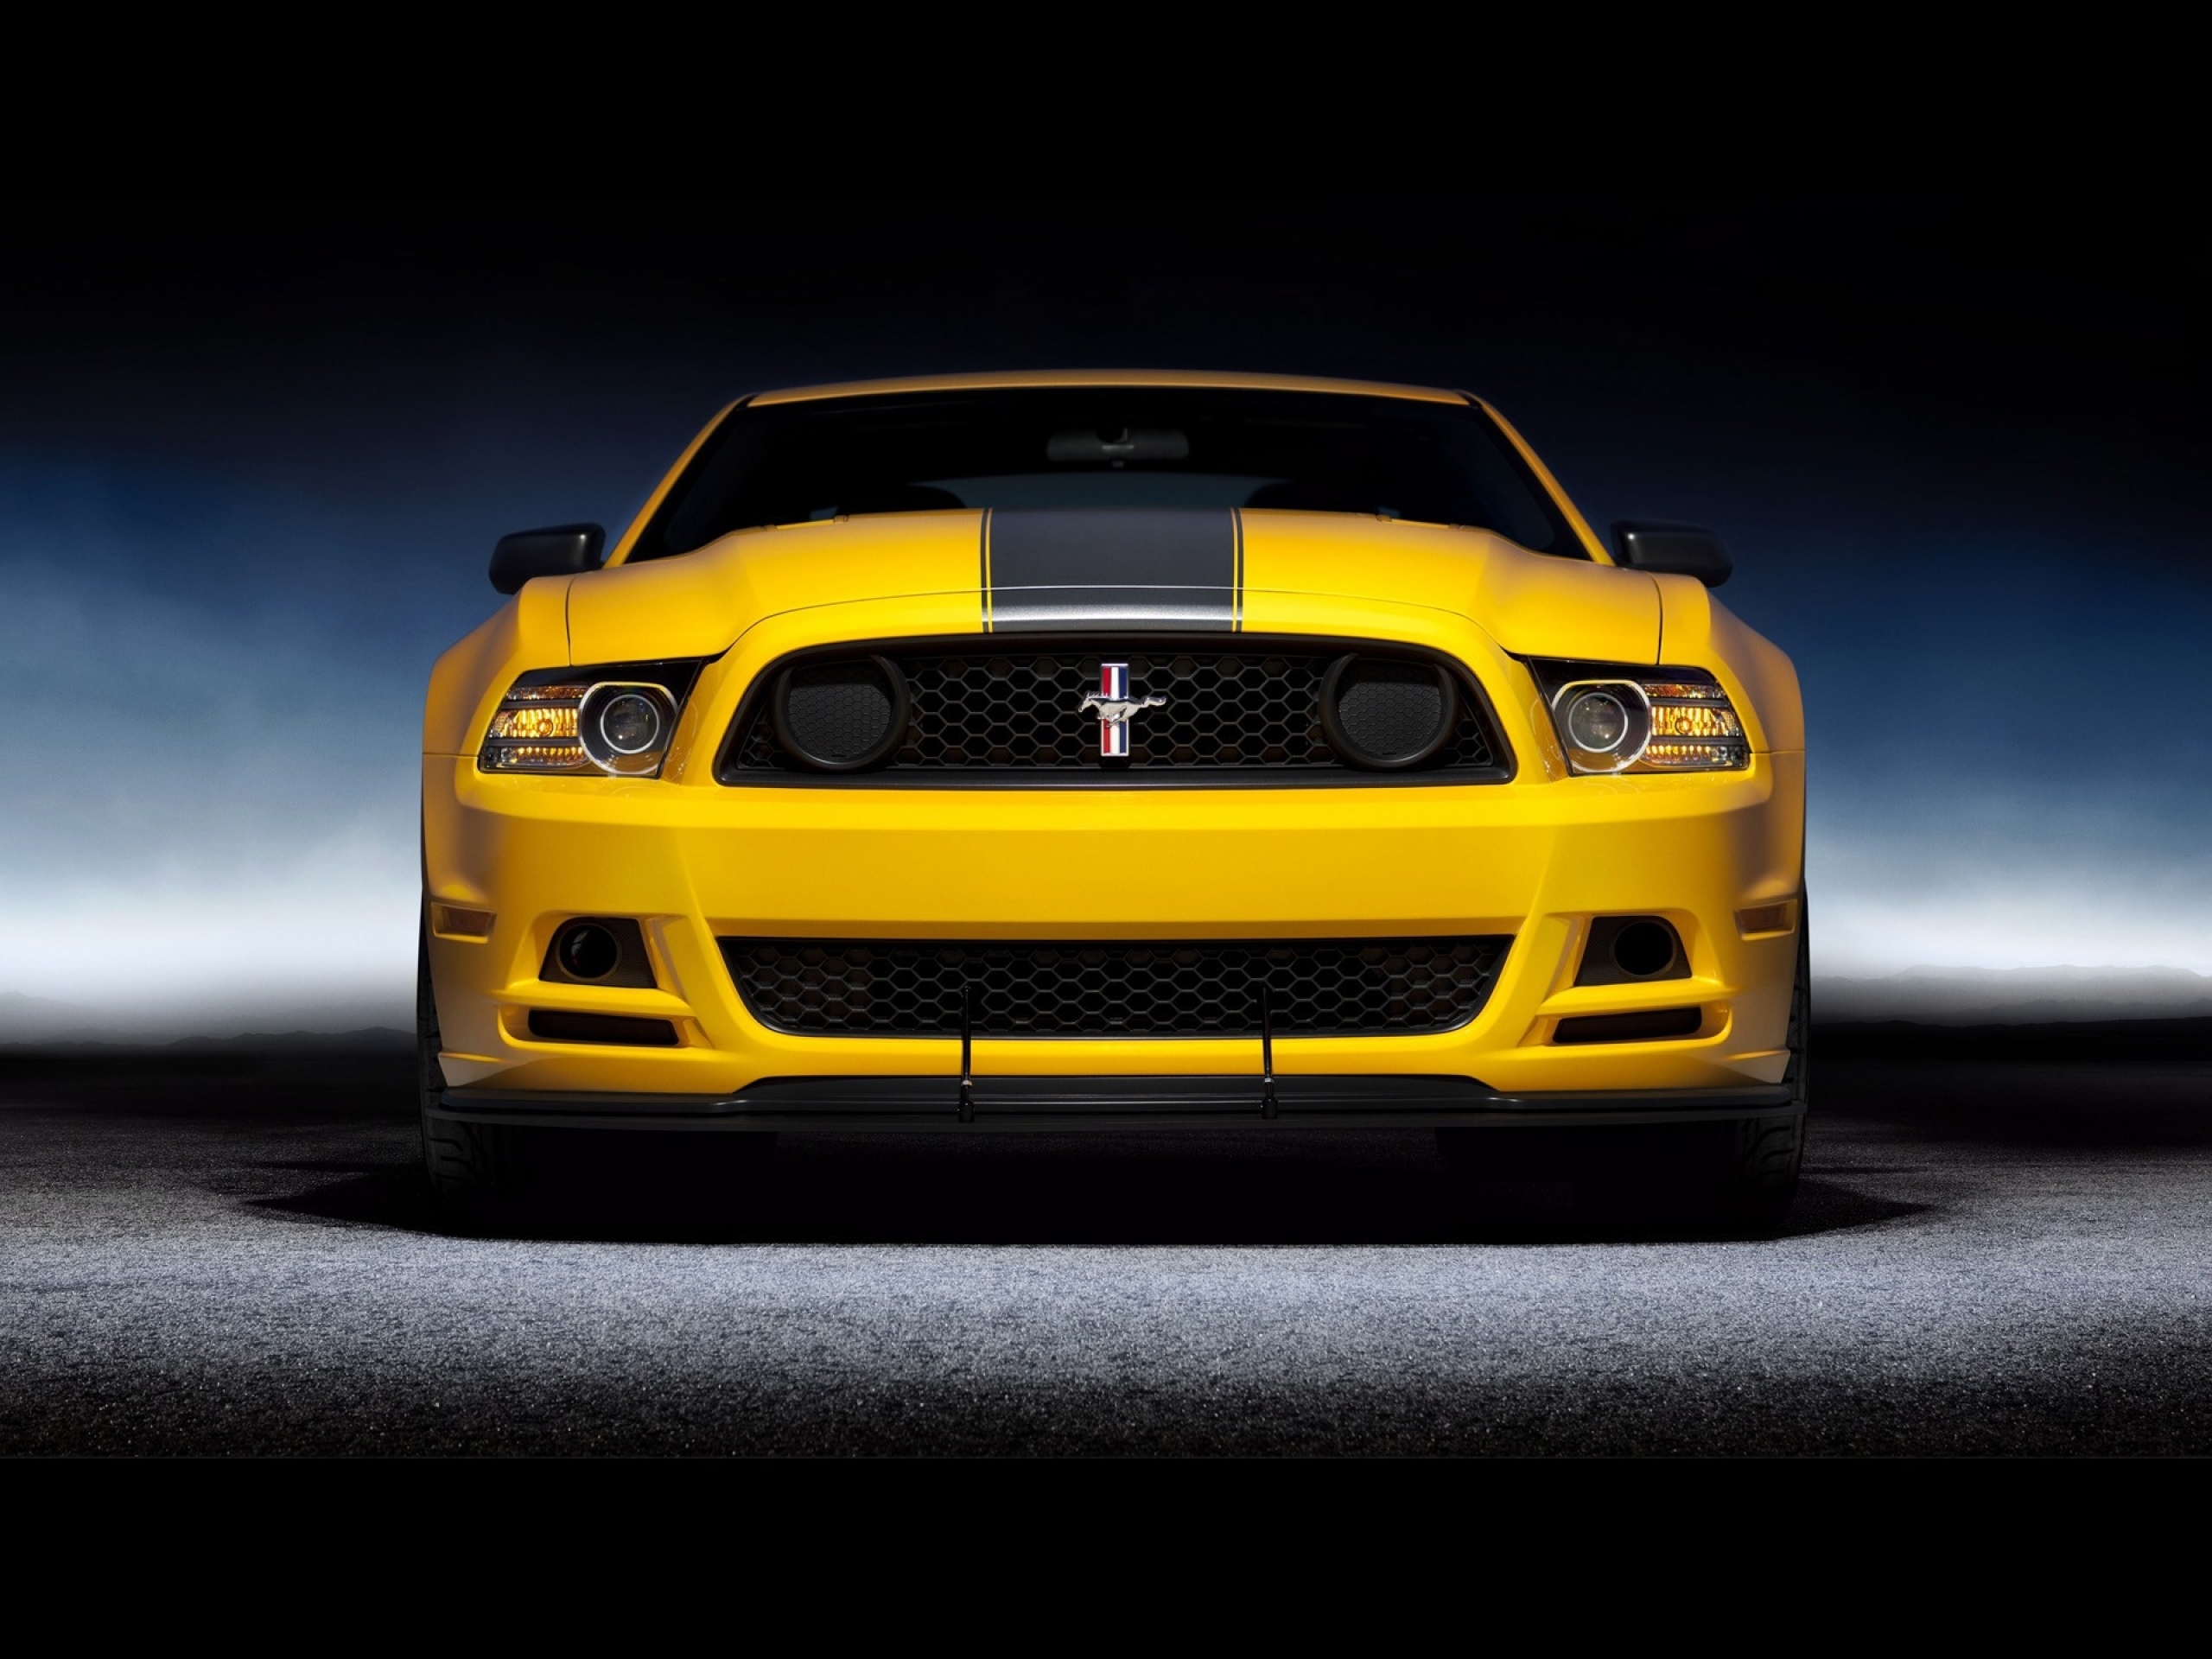 2013 Ford Mustang Boss 302 Hd Wallpaper Background Image 2560x1920